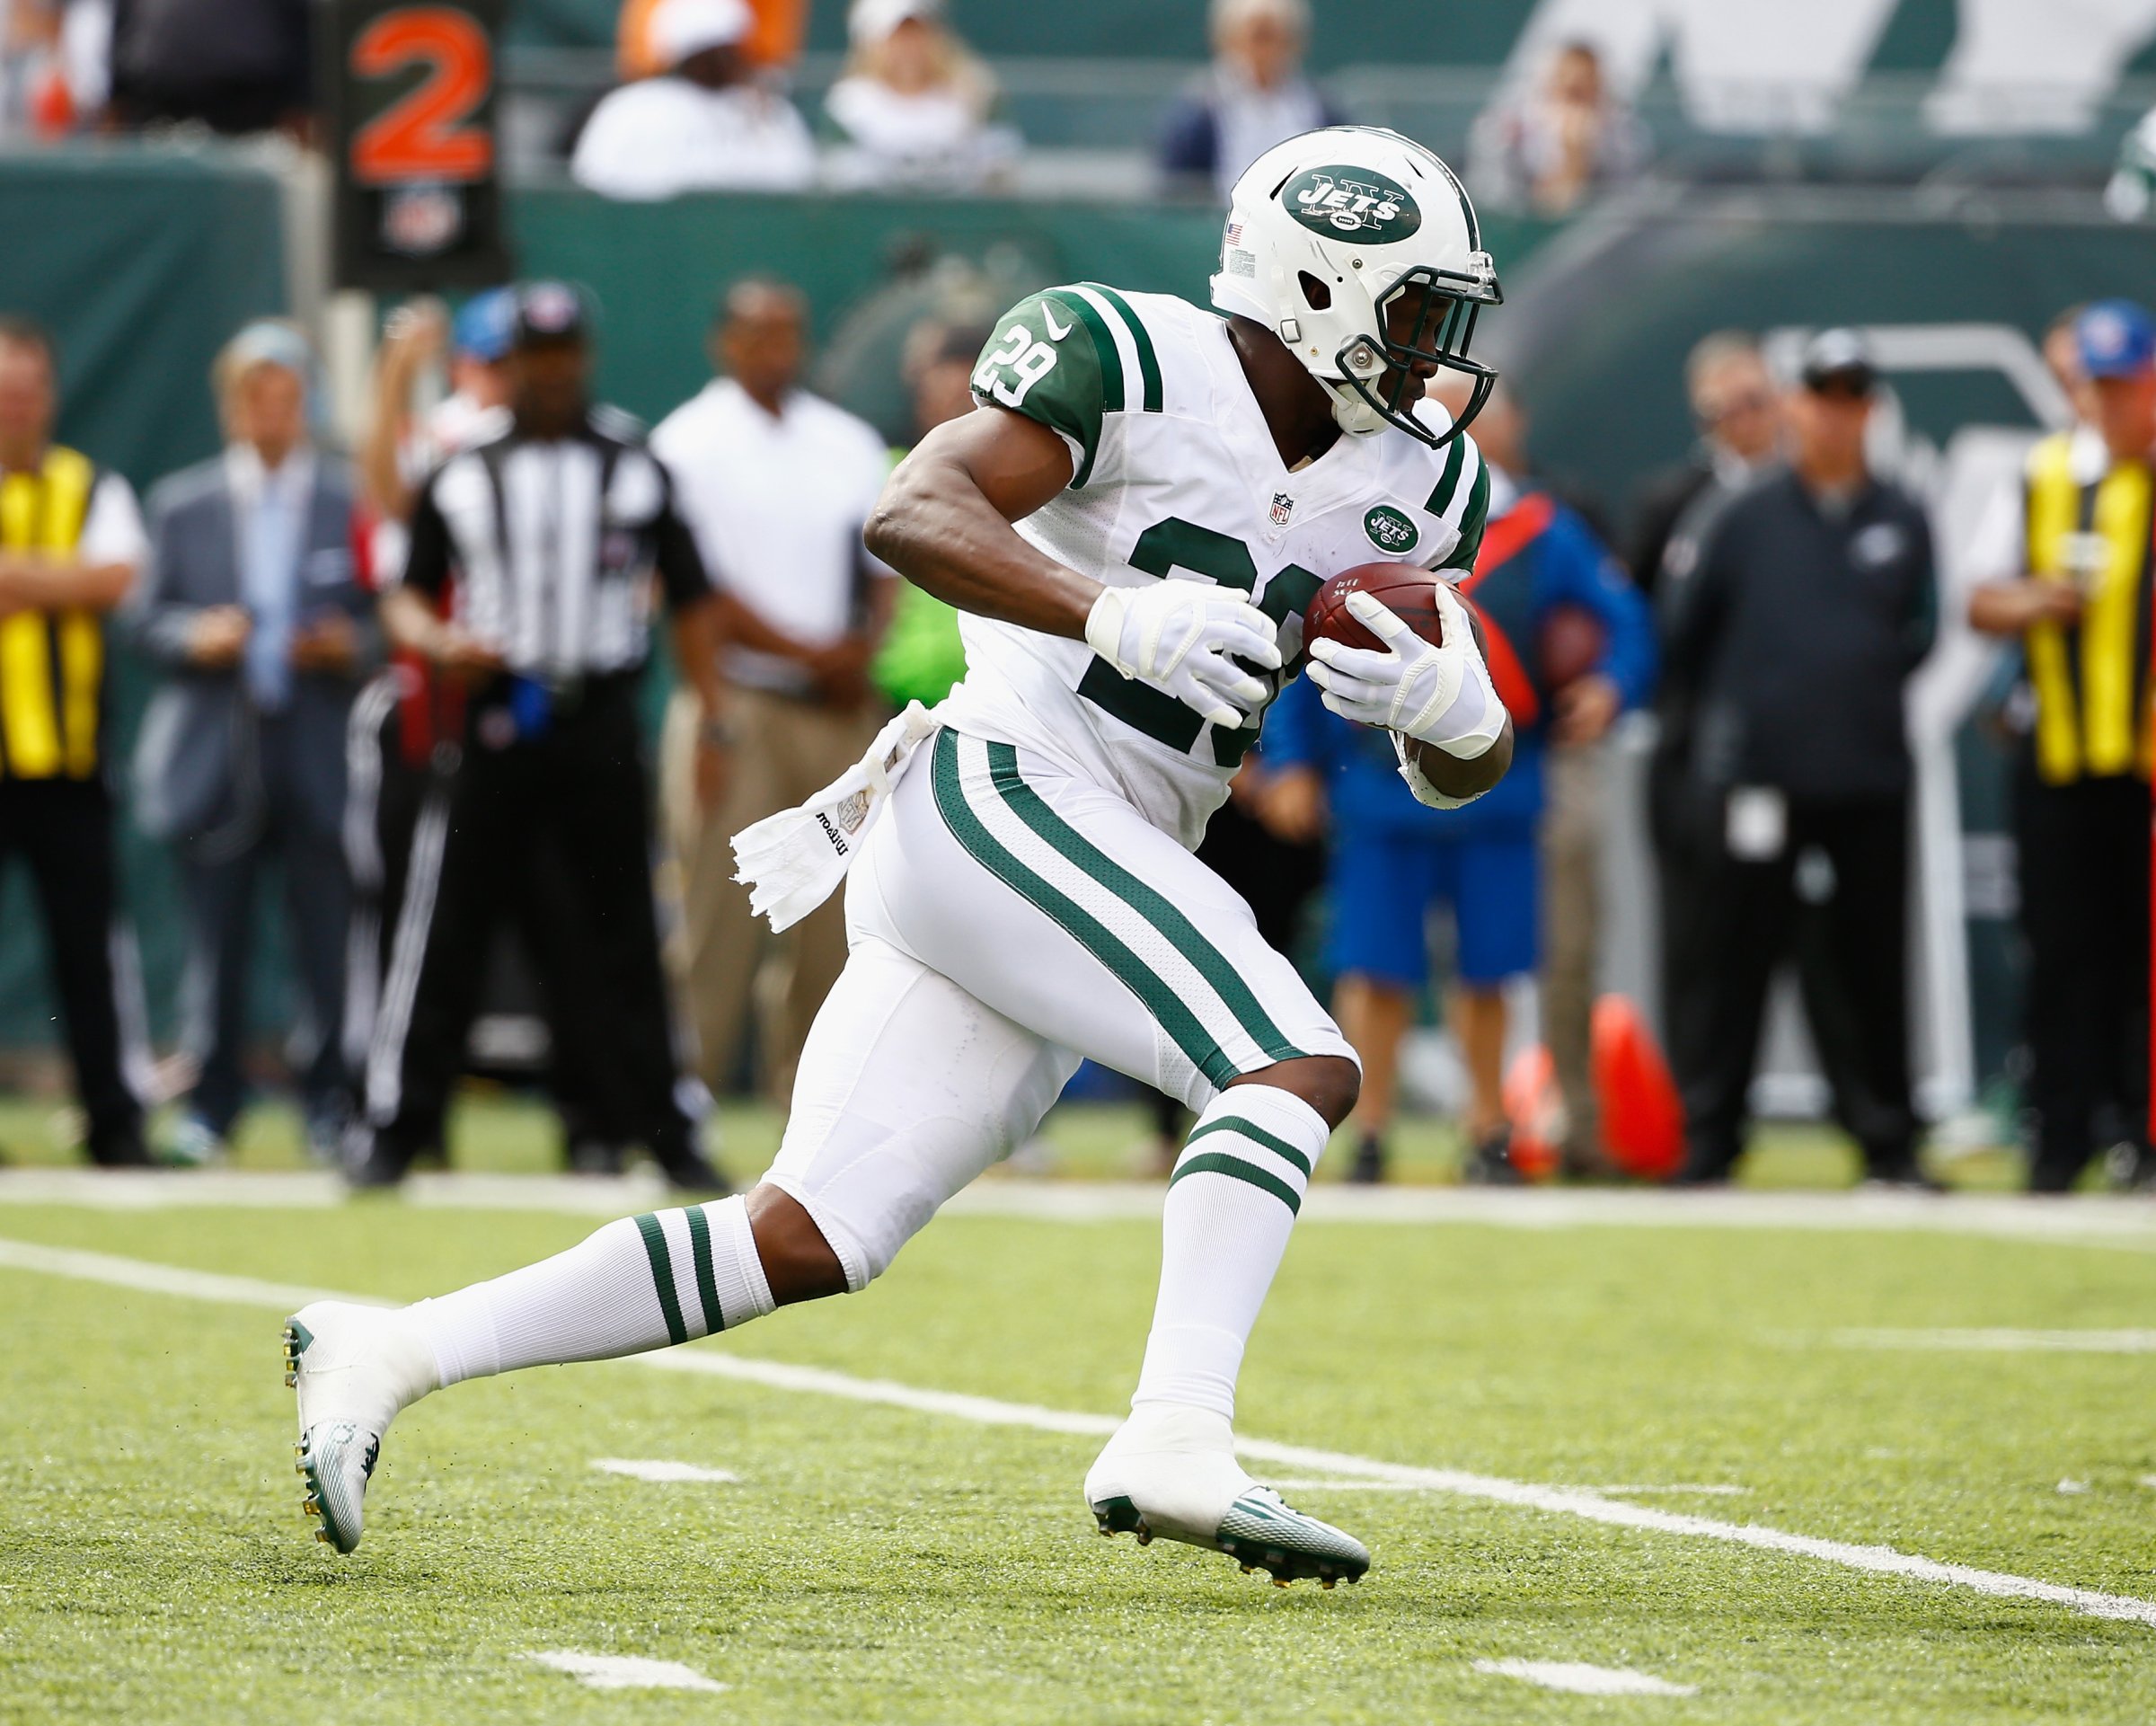 Bilal Powell #29 of the New York Jets runs against the Philadelphia Eagles during their game at MetLife Stadium on September 27, 2015 in East Rutherford, New Jersey.